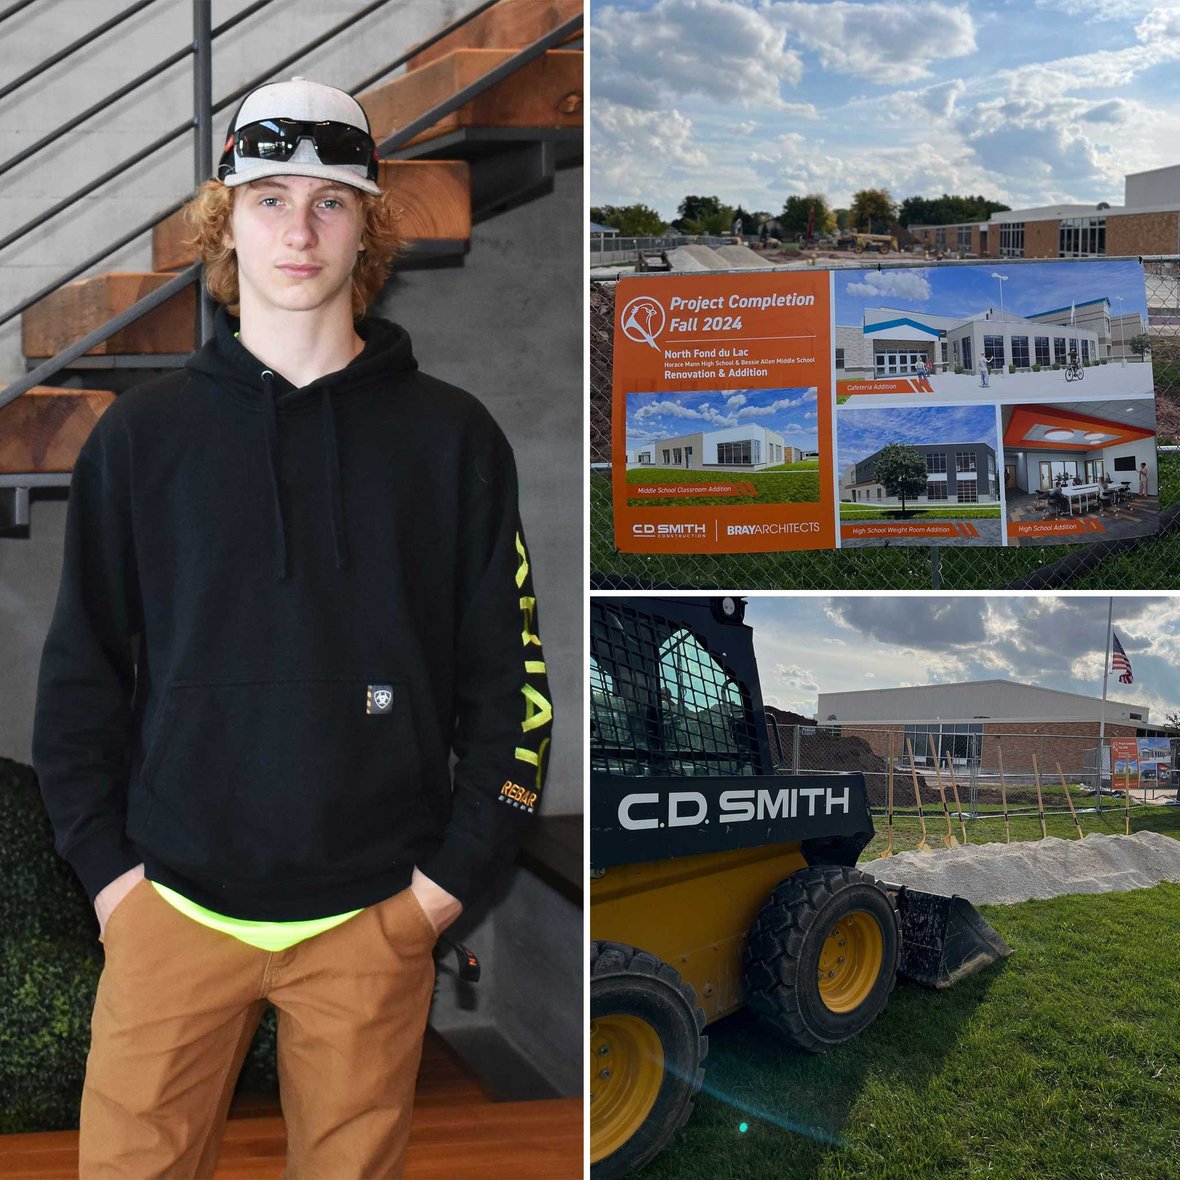 Youth Apprentice Caleb Krug working with CD Smith Construction on North Fond du Lac School District project